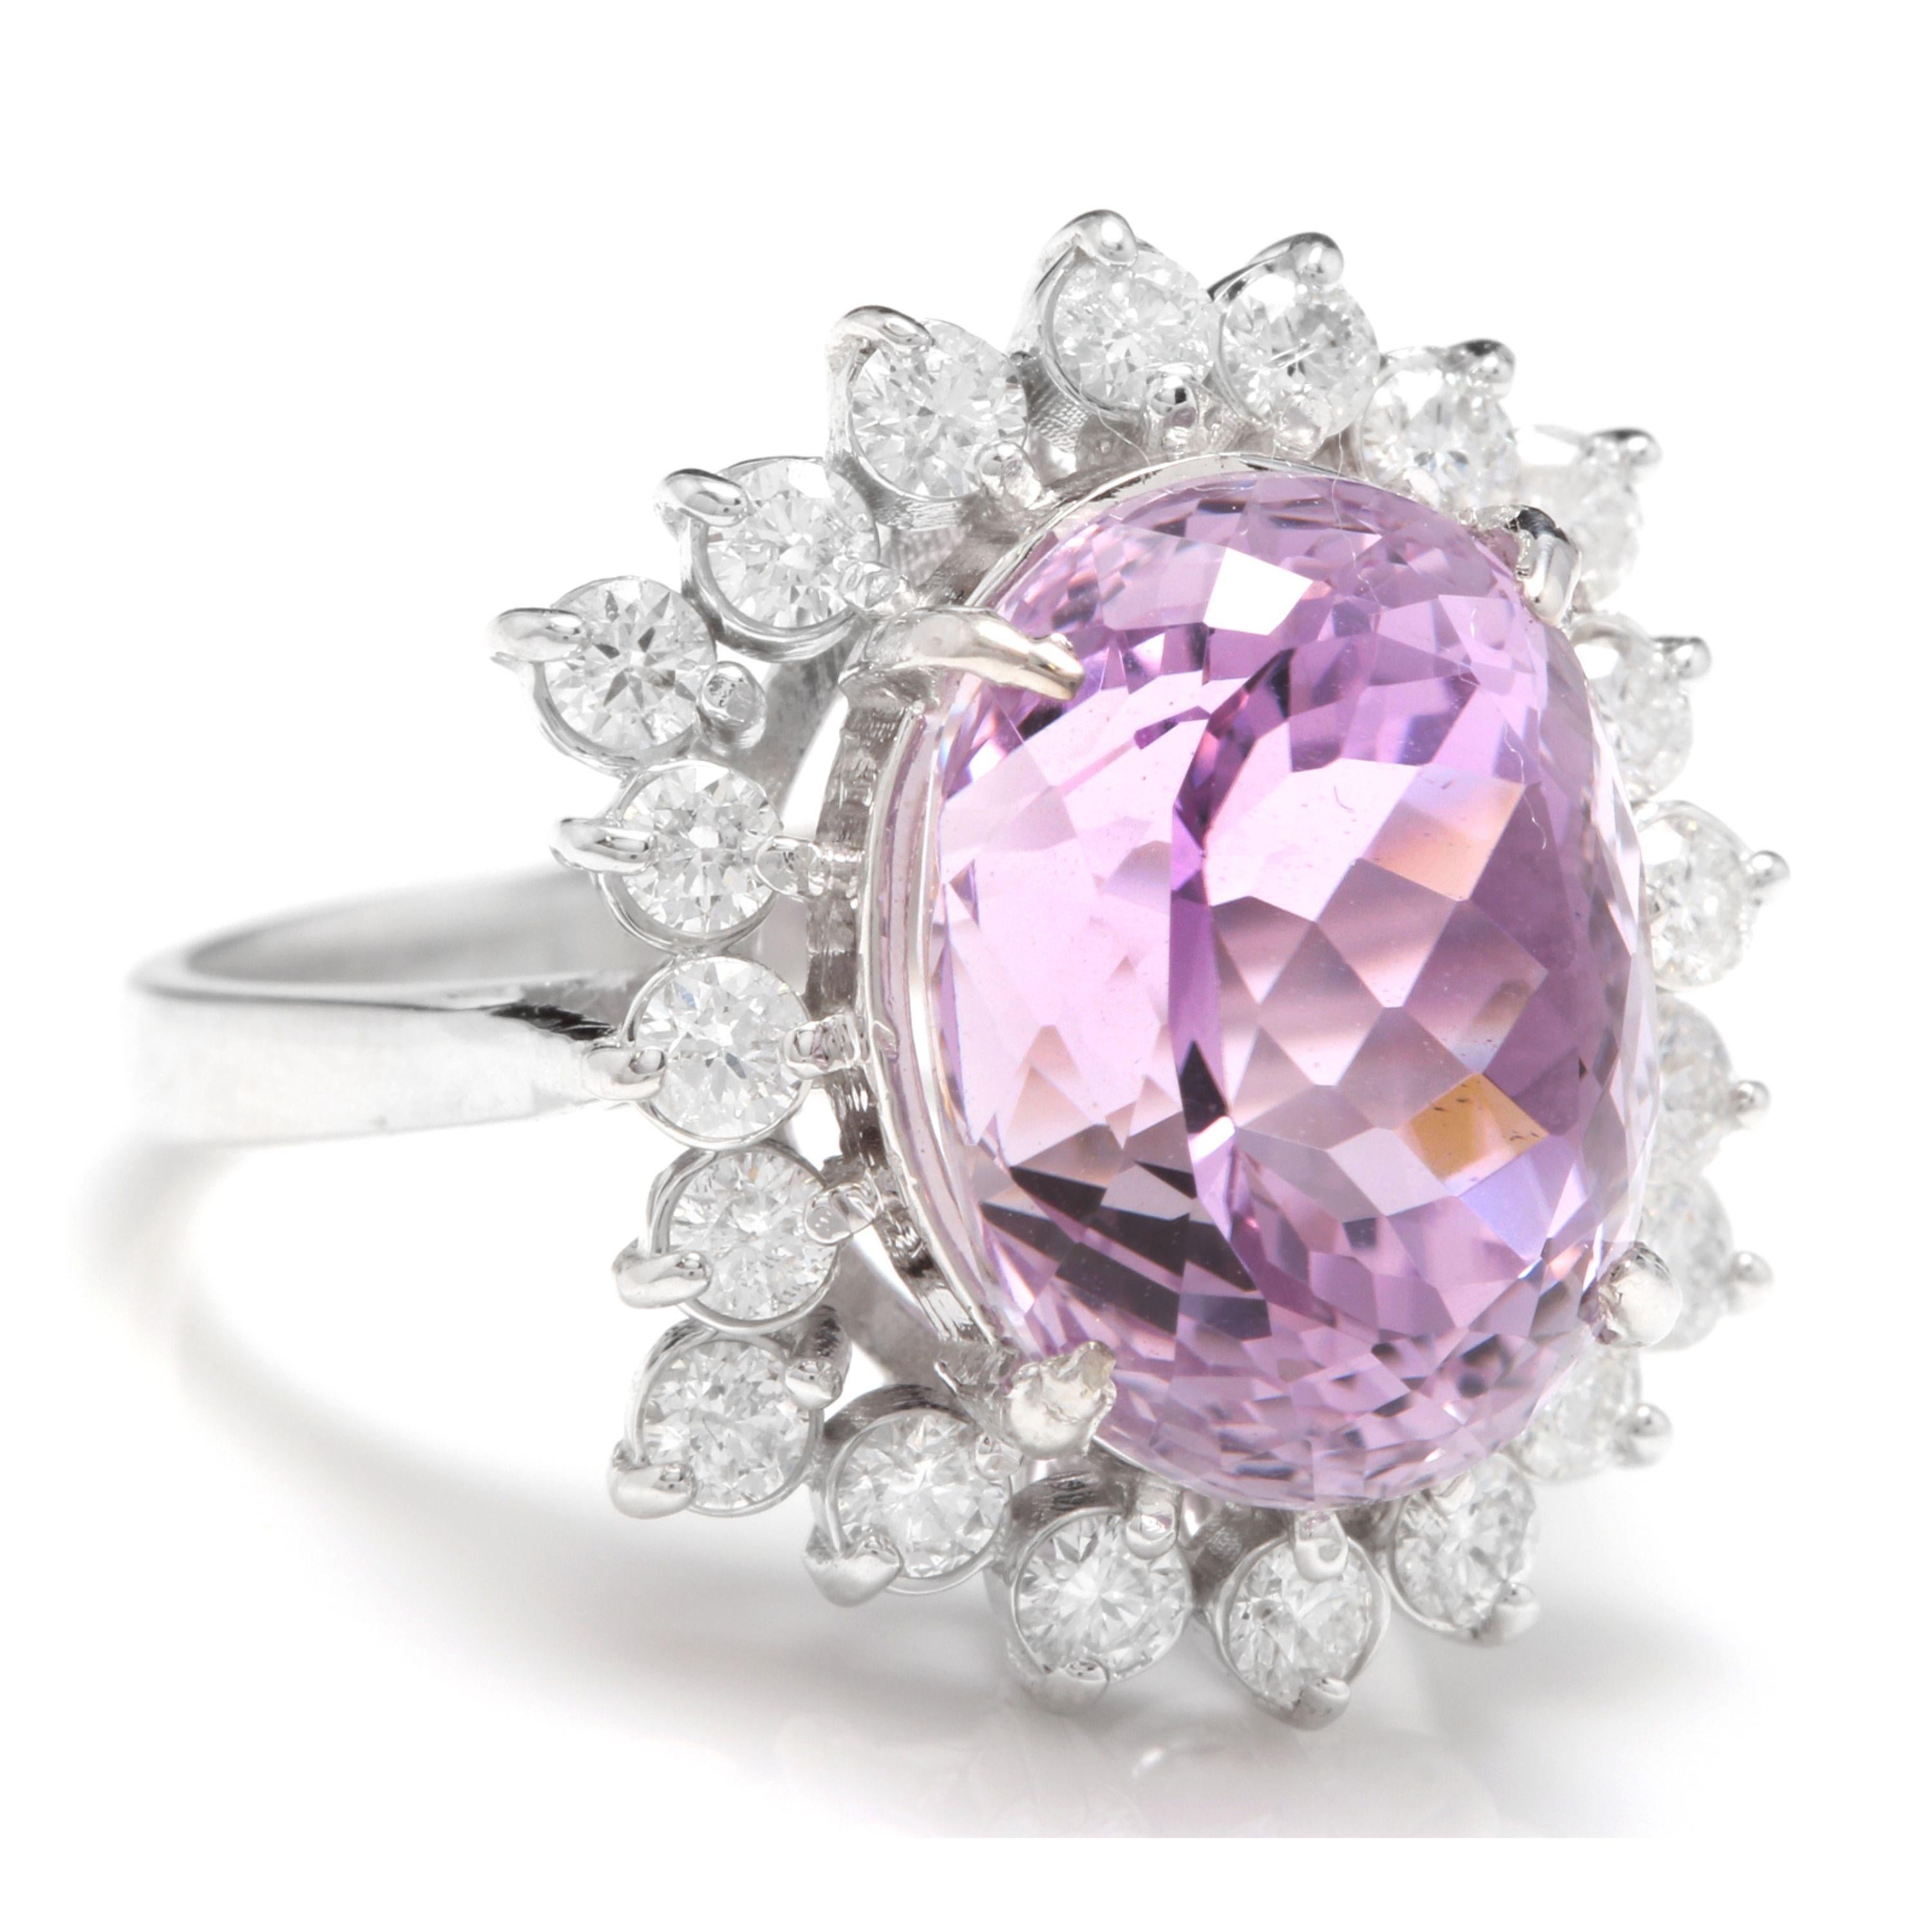 8.40 Carats Natural Kunzite and Diamond 14K Solid White Gold Ring

Total Natural Oval Cut Kunzite Weights: 7.50 Carats

Kunzite Measures: Approx. 13.00 x 10.00mm

Natural Round Diamonds Weight: 0.90 Carats (color G-H / Clarity SI1-SI2)

Ring size: 6